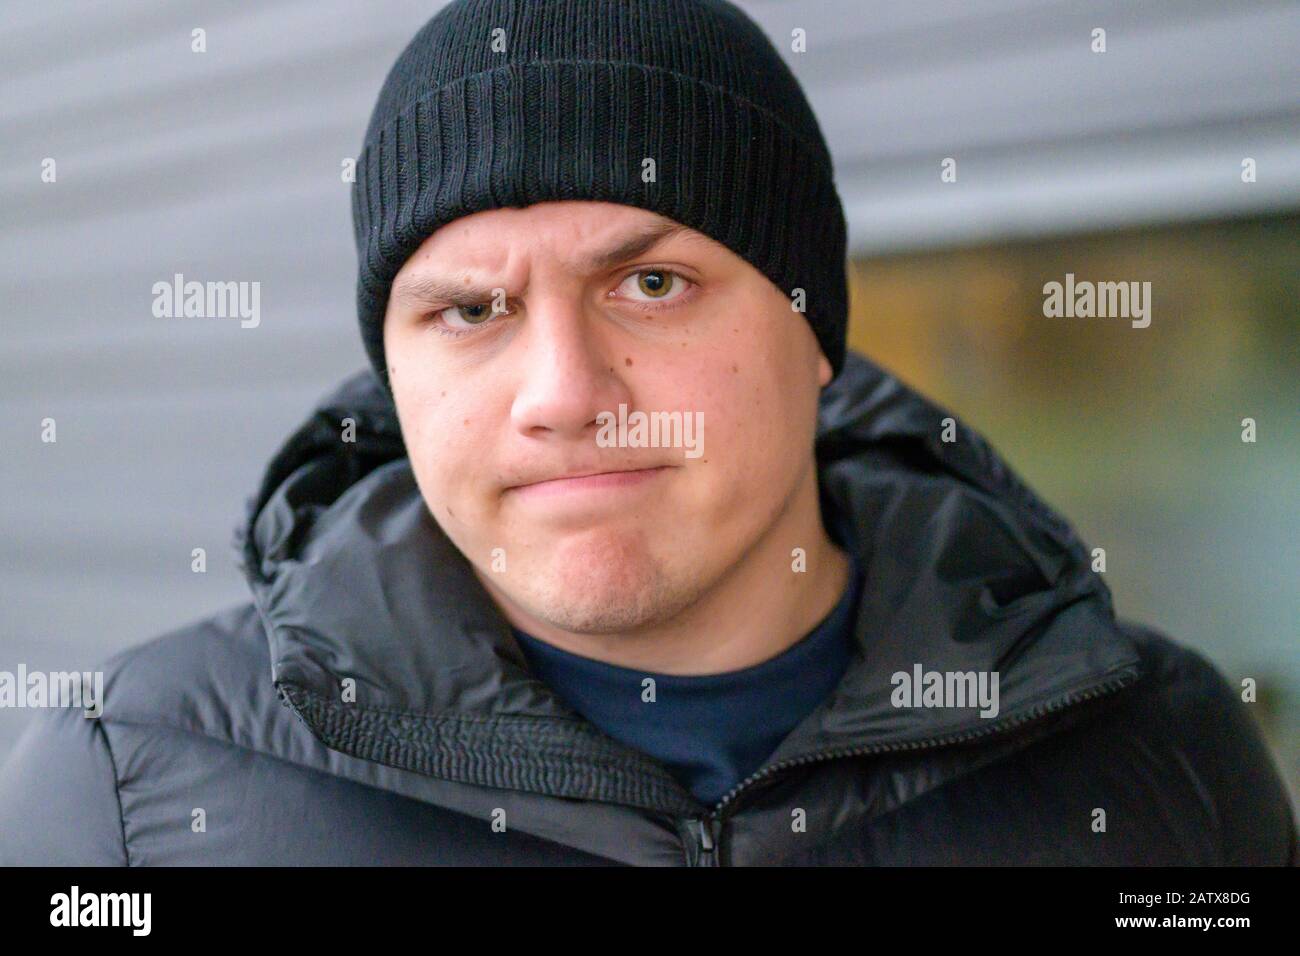 Determined sceptical young man wearing a beanie and warm jacket standing outdoors in winter frowning at the camera with raised eyebrow and a grimace Stock Photo